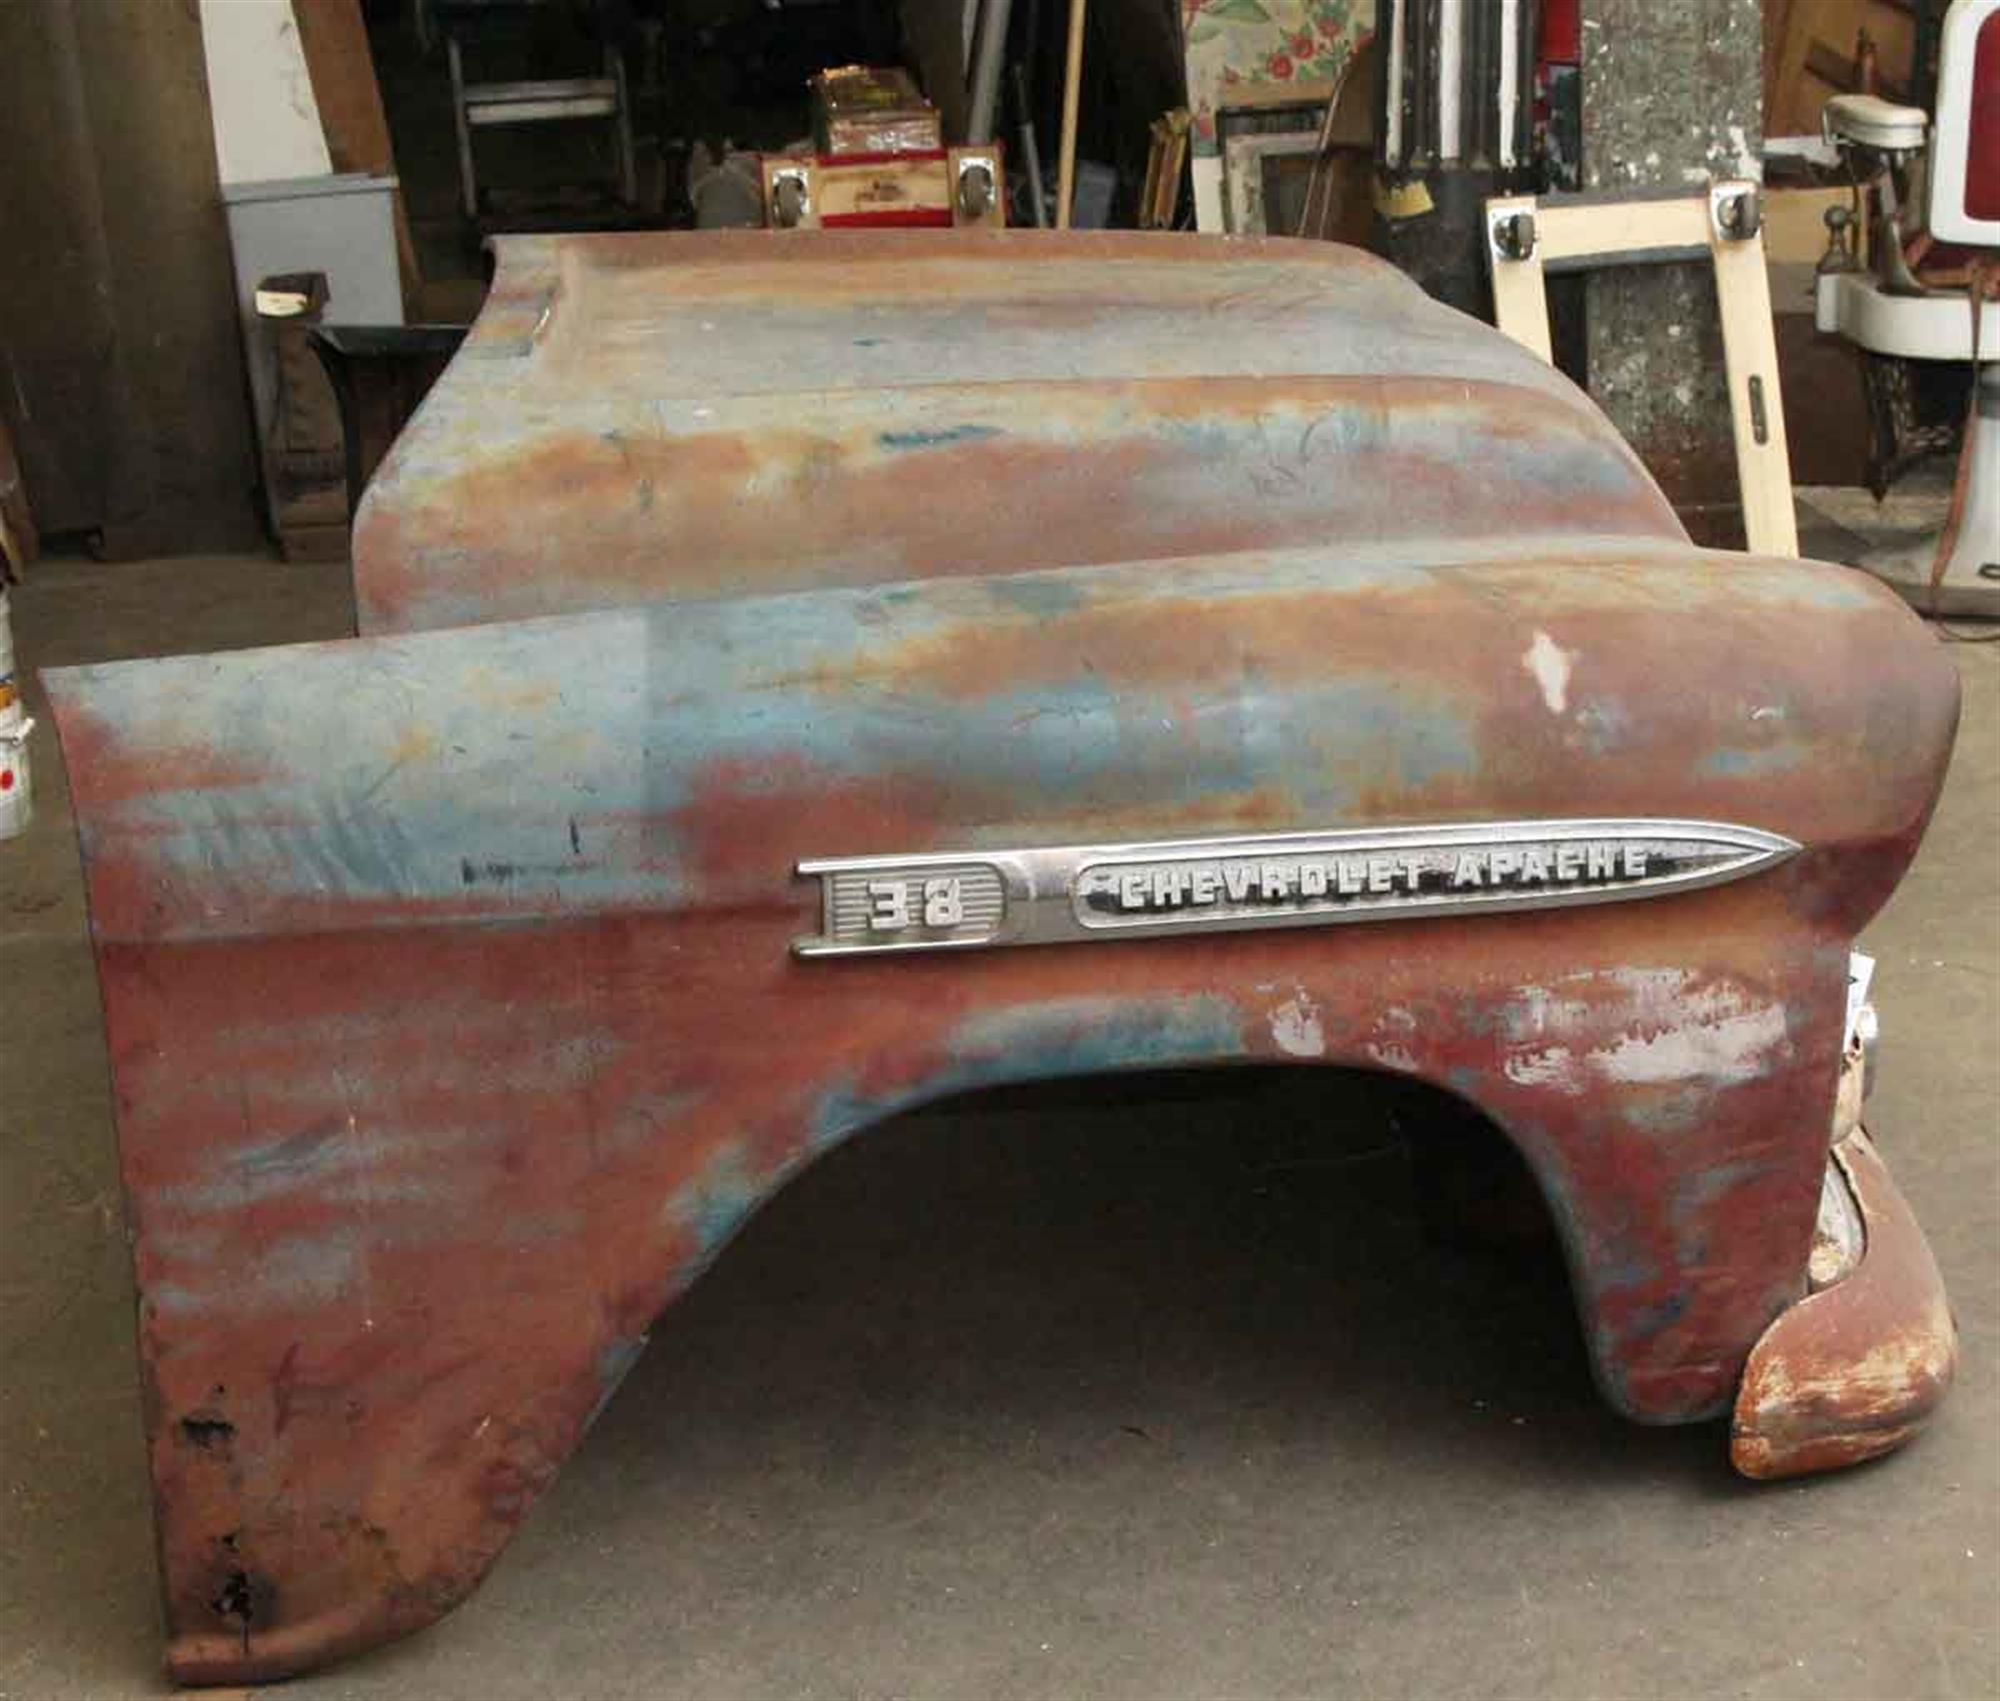 1959 S8 Chevy Apache Pick Up Truck Front End In Distressed Condition In New York, NY